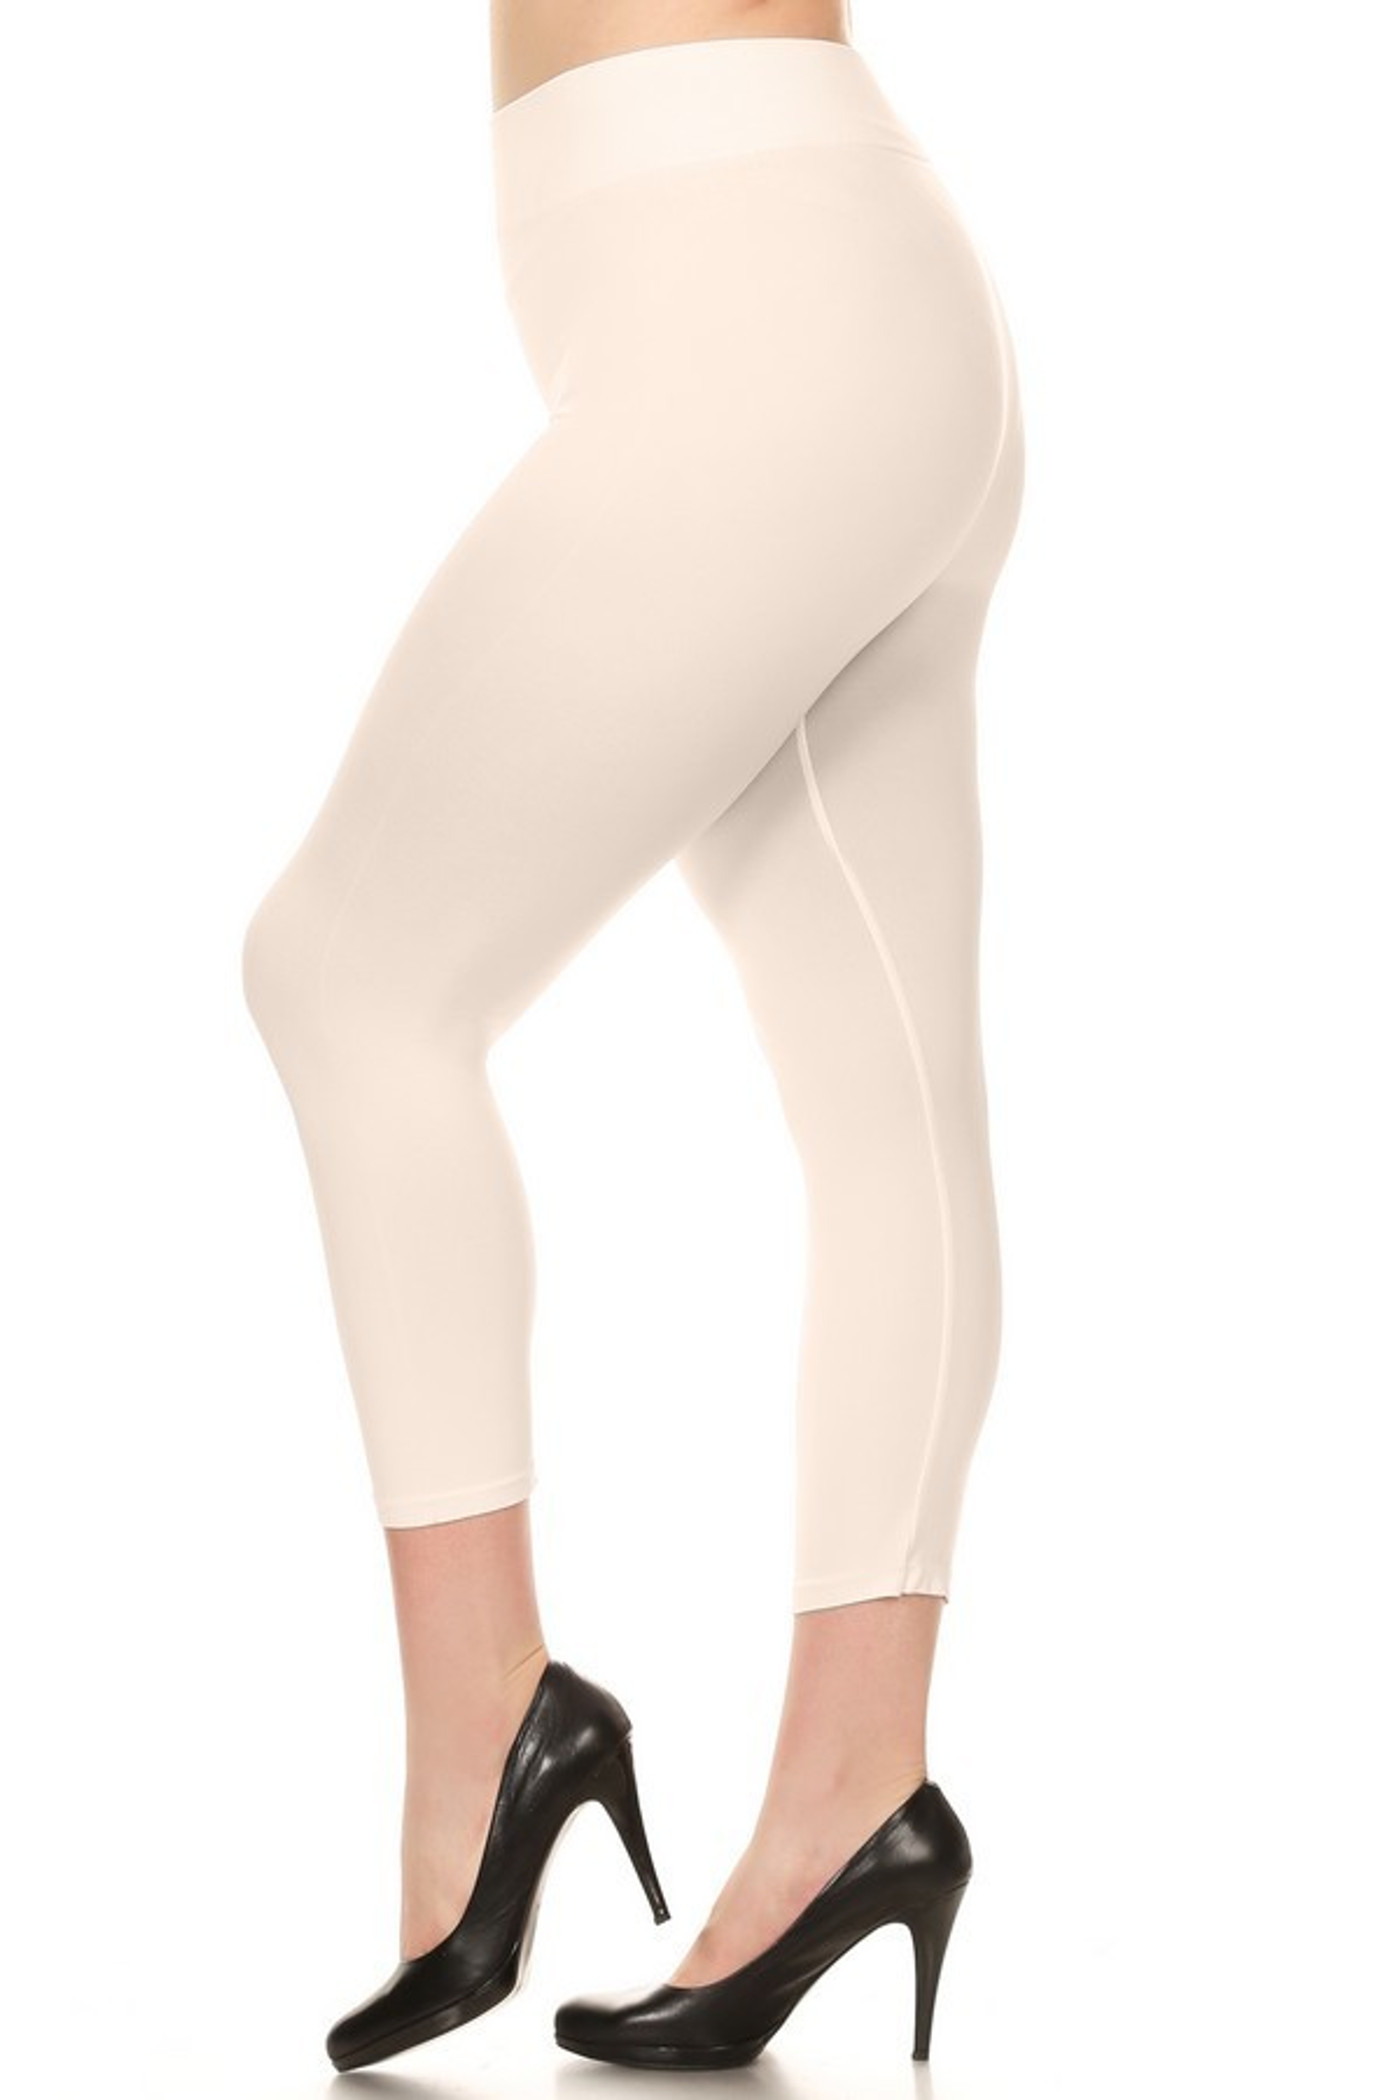 Aggregate more than 72 ivory colored leggings best